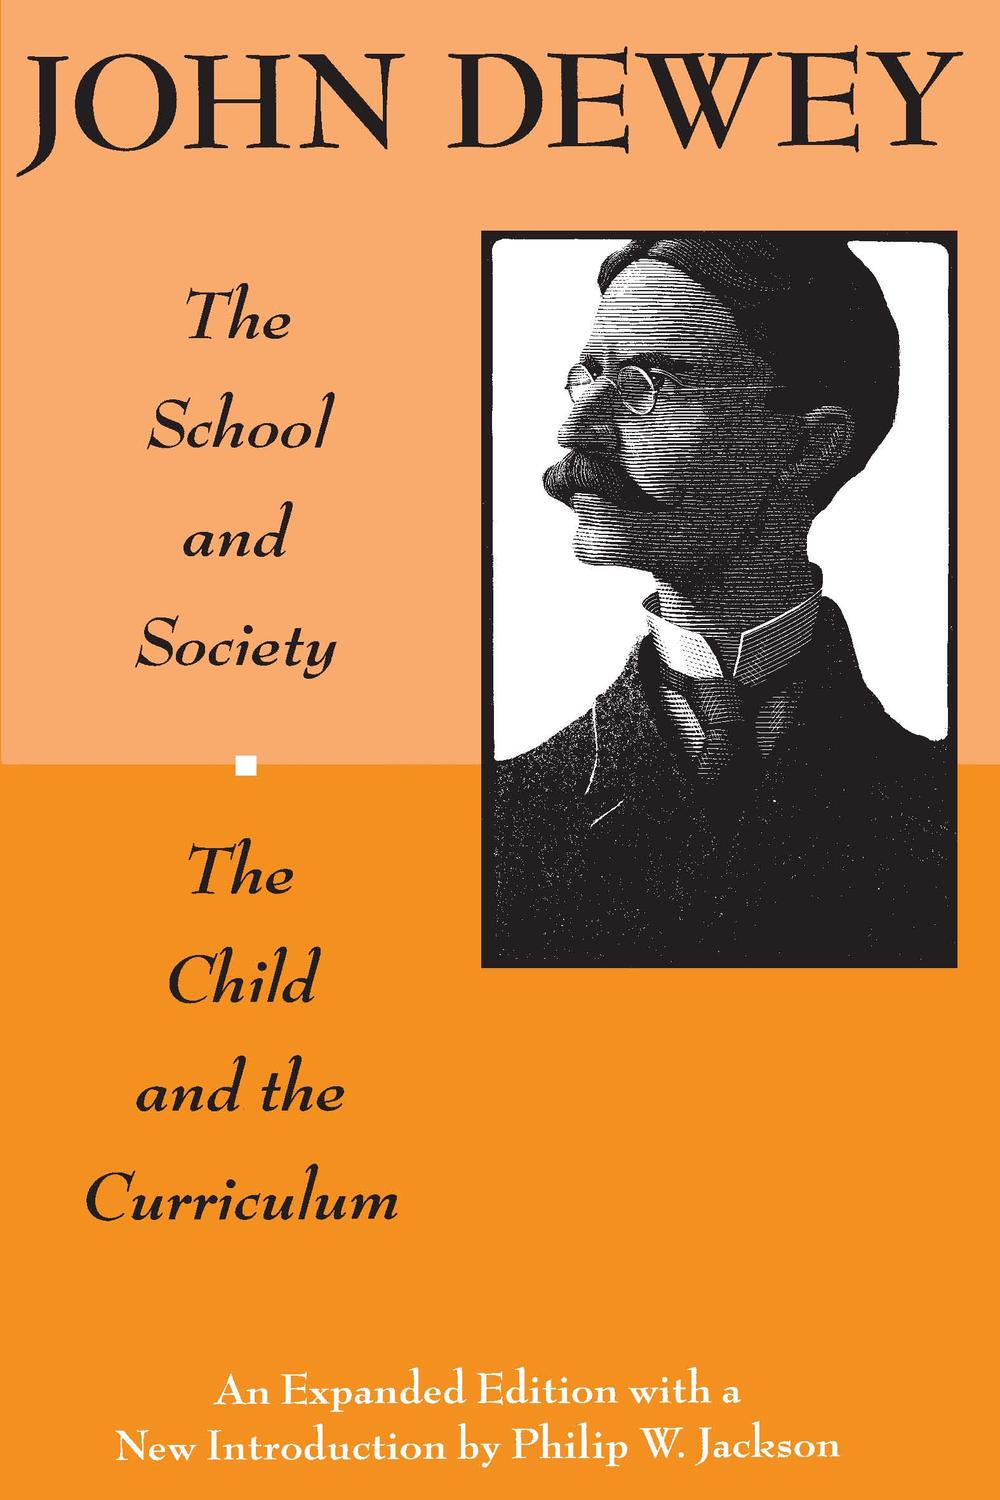 The School and Society and The Child and the Curriculum - John Dewey